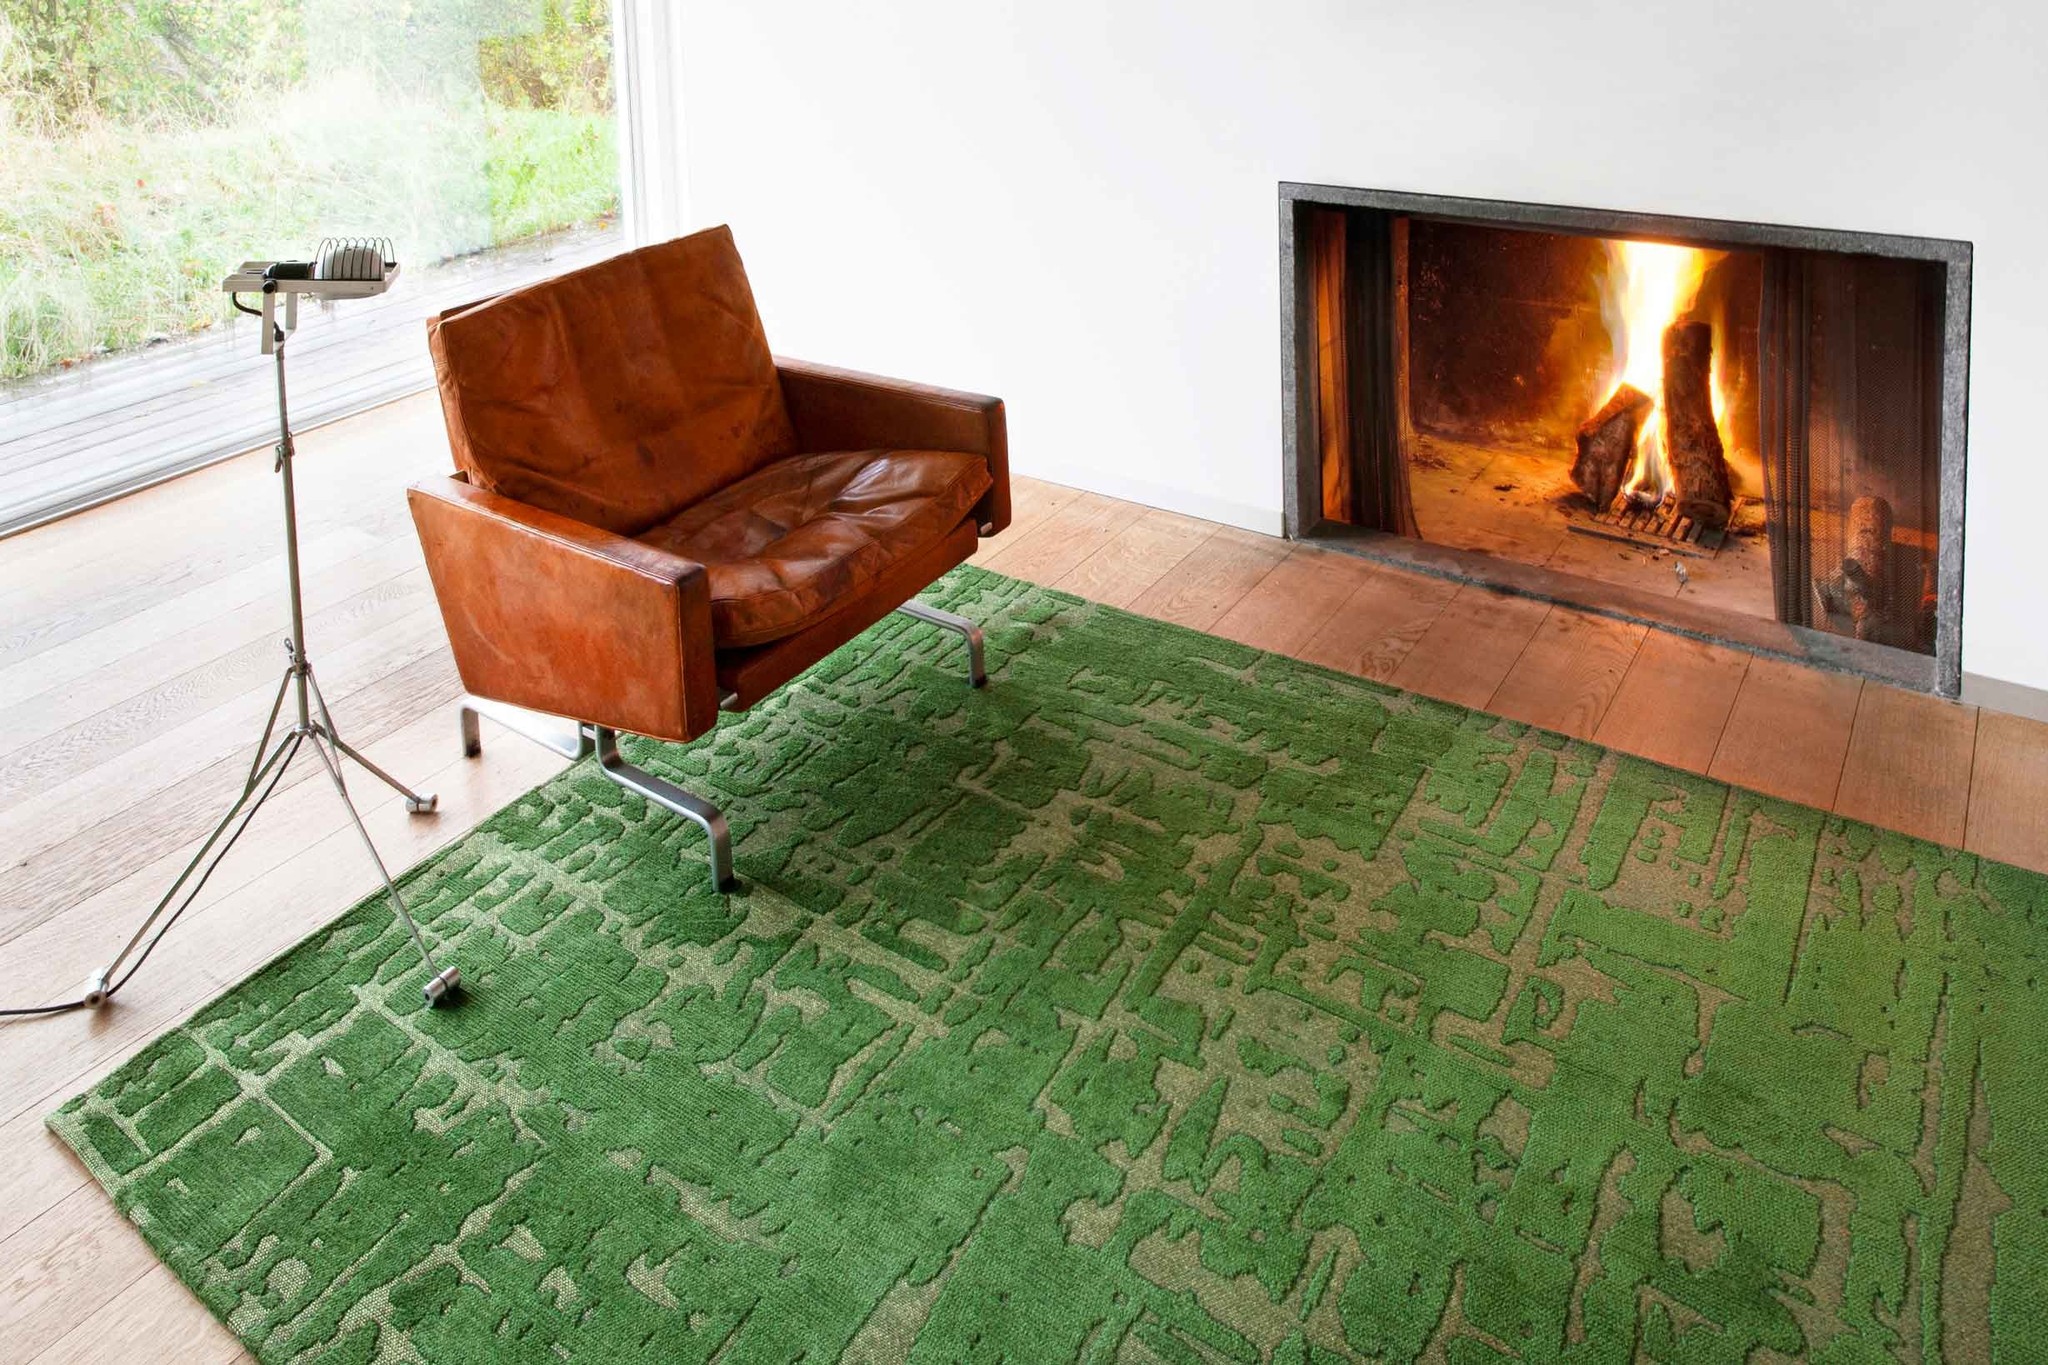 Abstract Green Belgian Rug ☞ Size: 2' 7" x 8' 2" (80 x 250 cm)